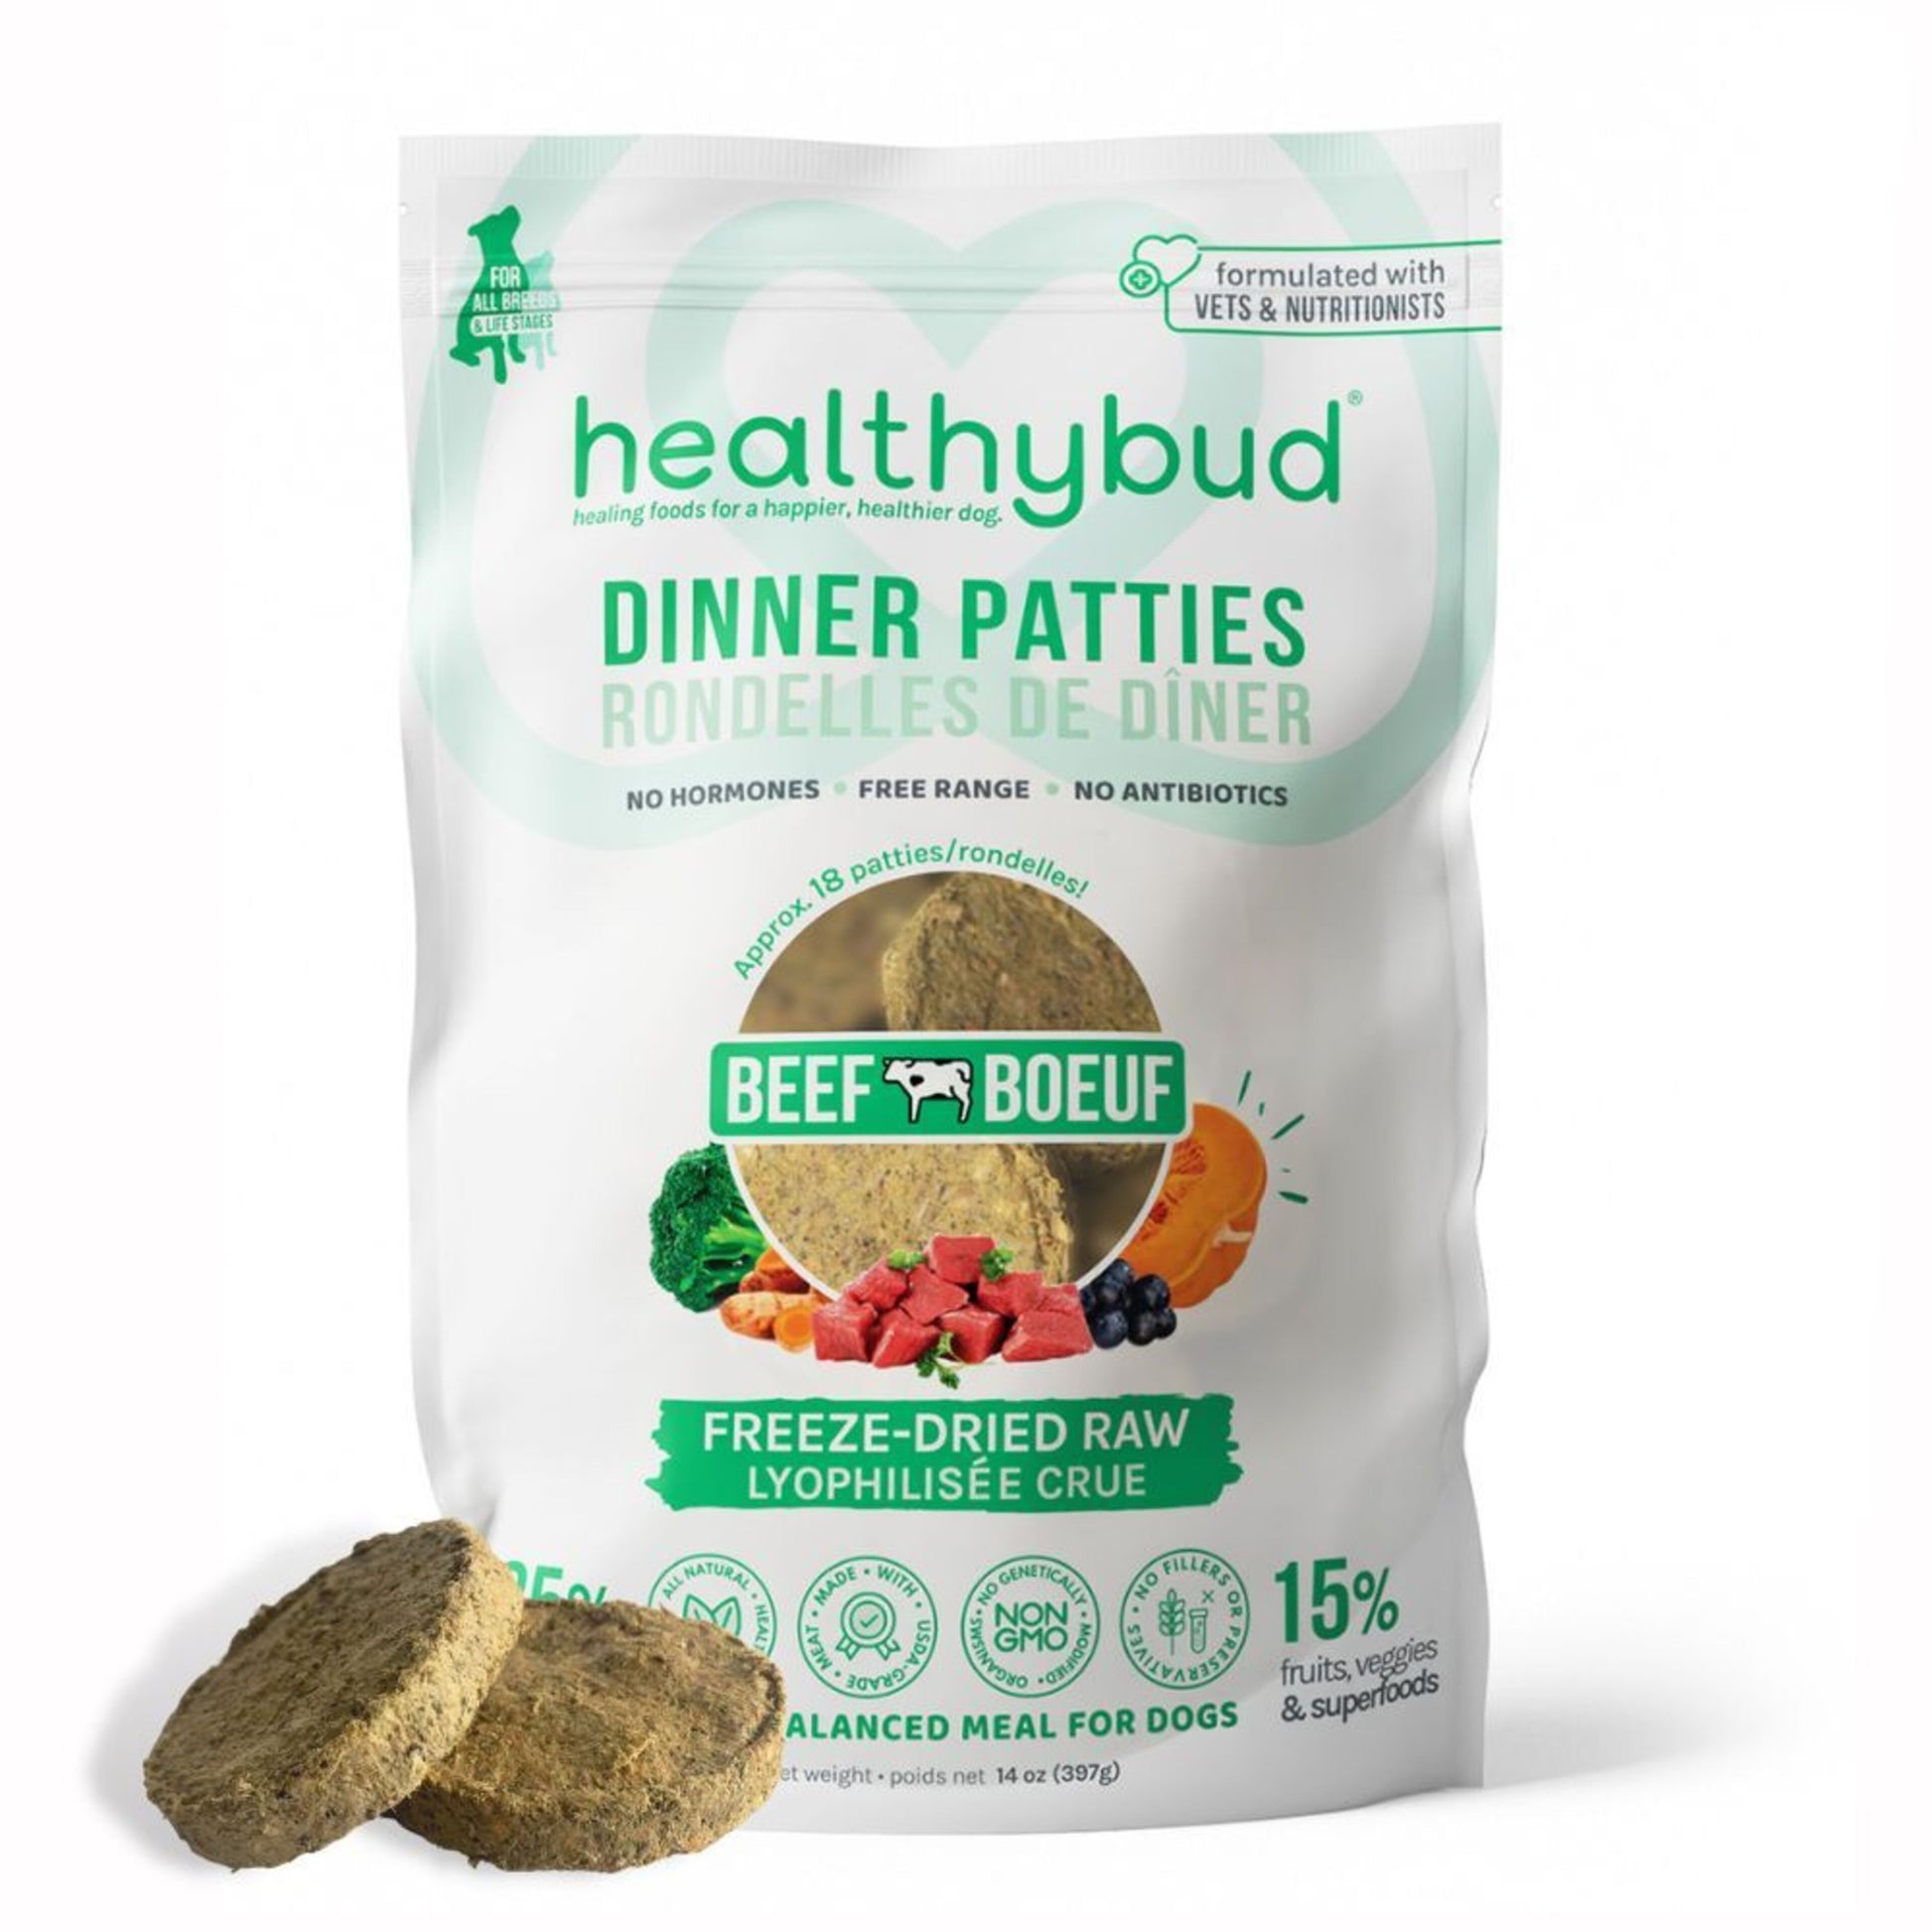 Healthybud Freeze-Dried Beef Meal Patties for Dogs 14 oz